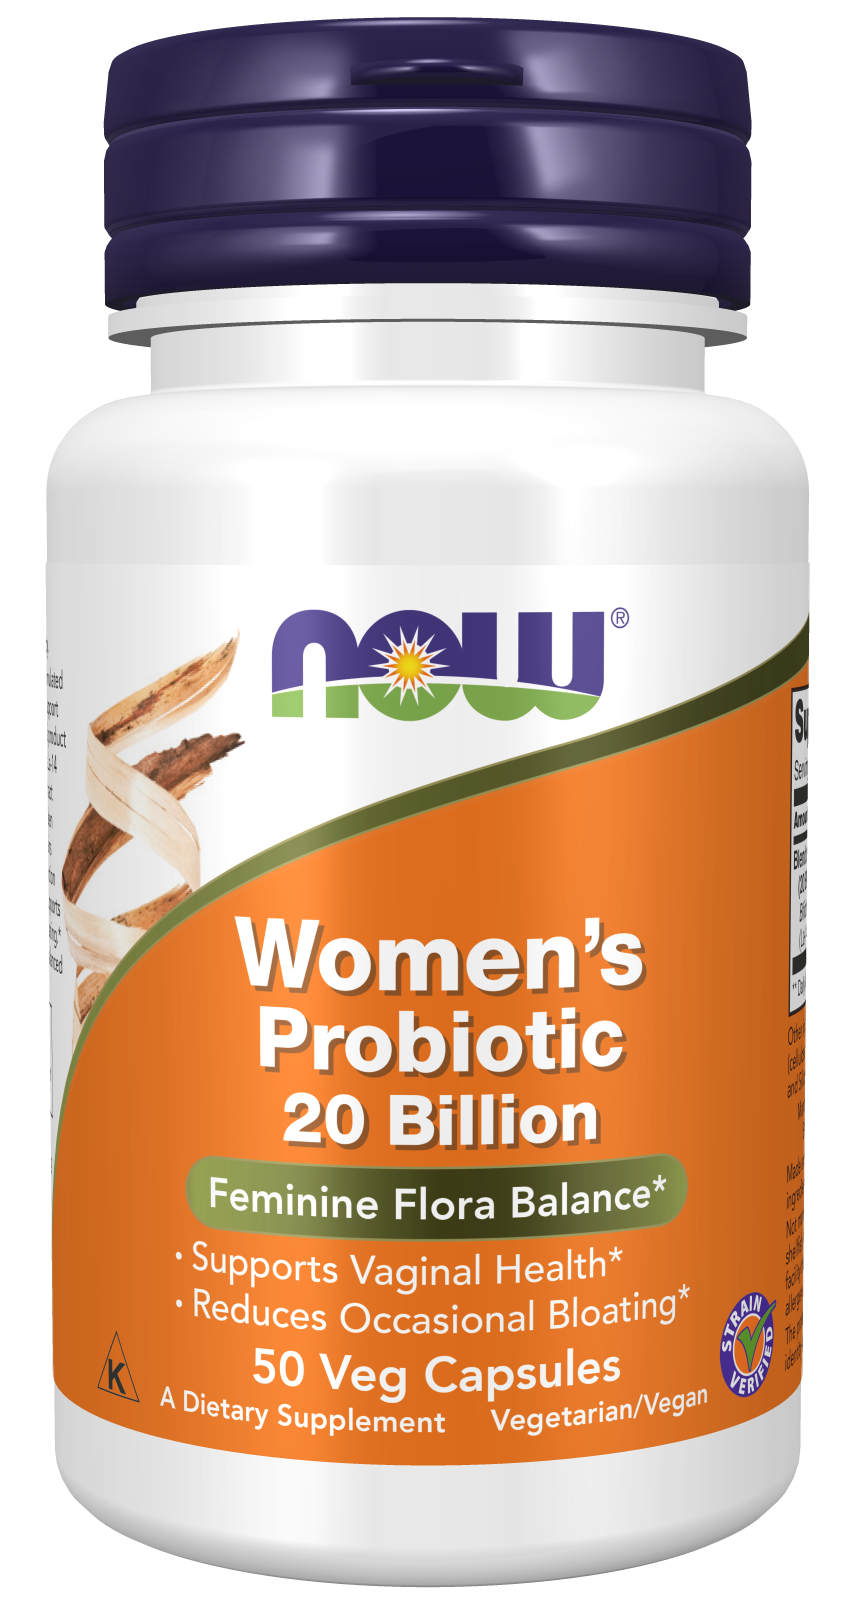 Women's Daily Probiotic & Reviews